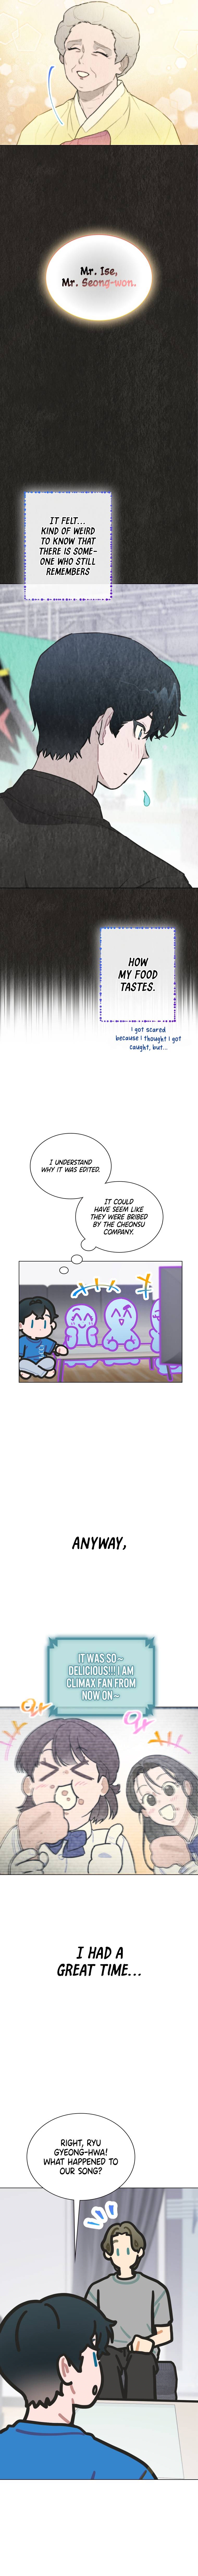 Saving The Doomed Idols With My Touch - chapter 20 - #6